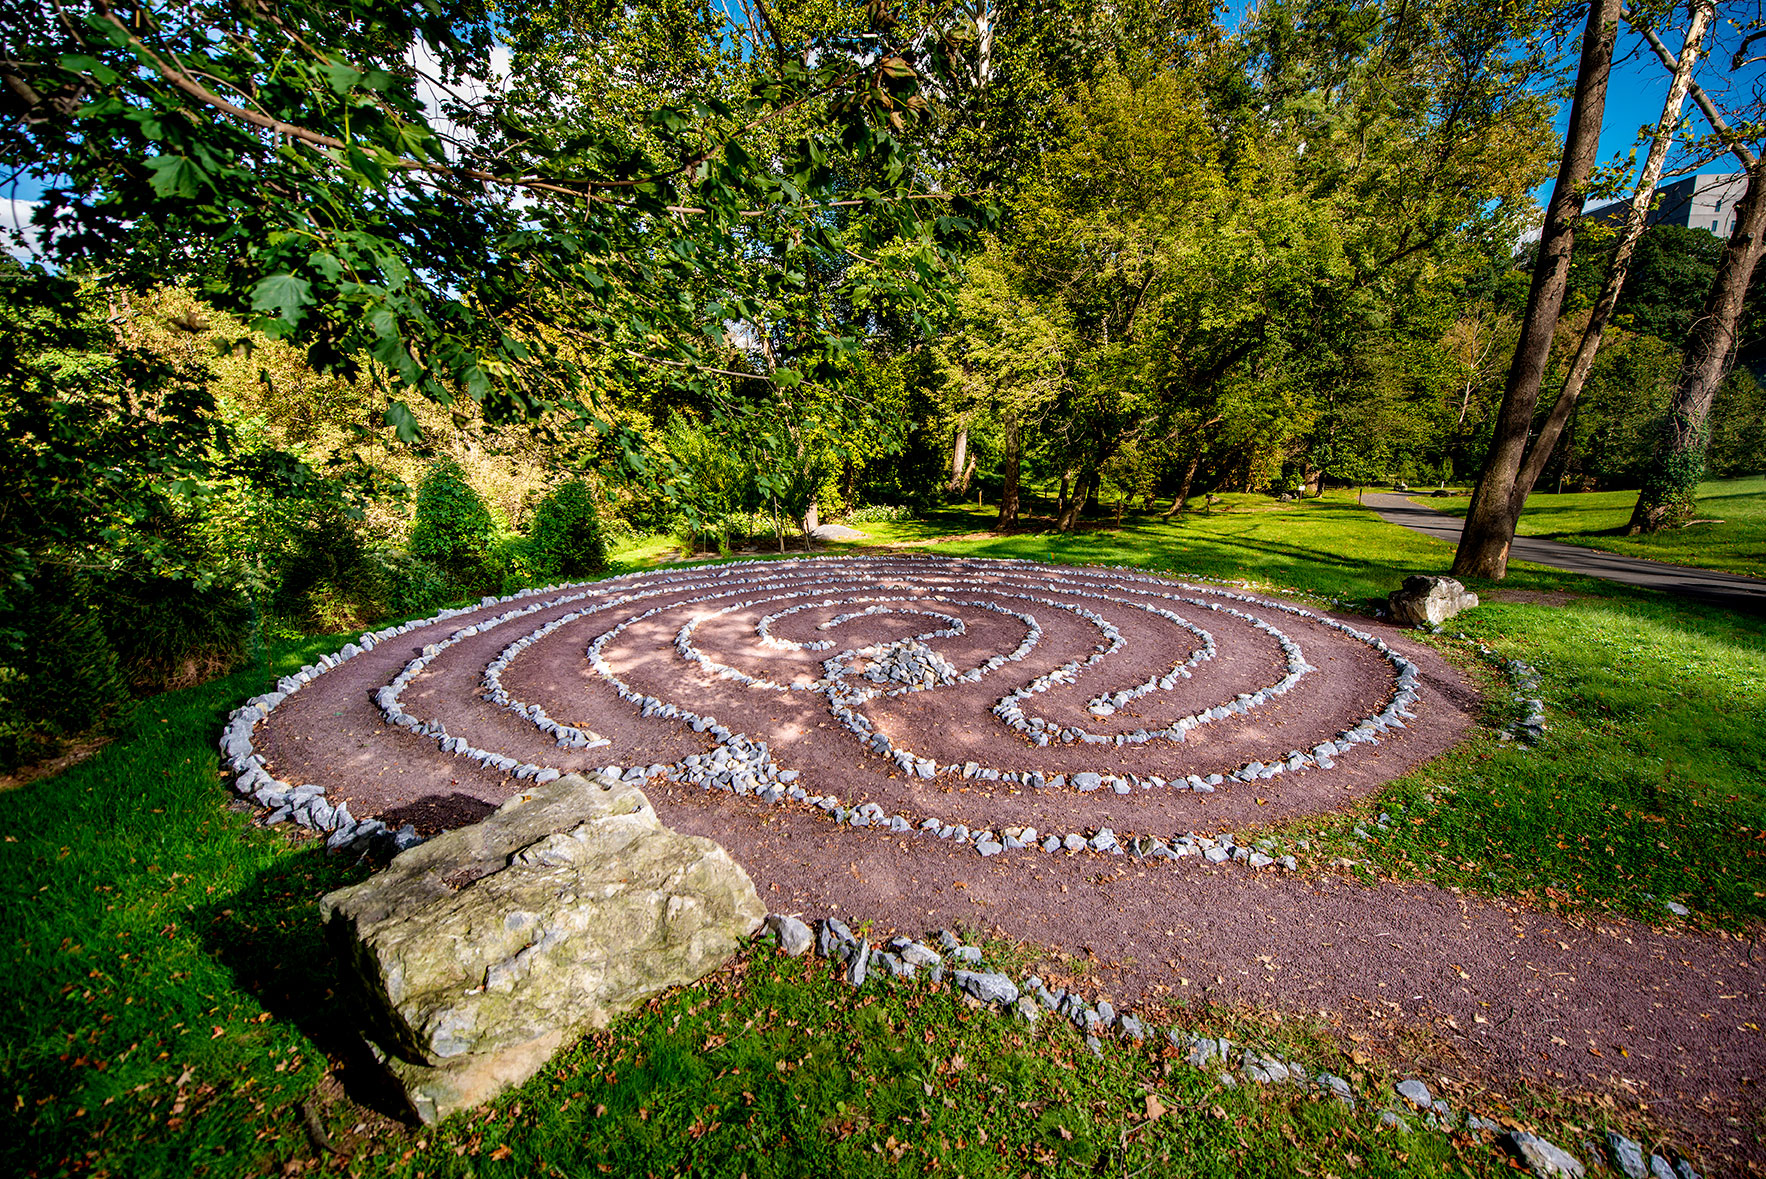 The outdoor art piece Labyrinth by Deborah Ketter on the Karl Stirner Arts Trail in Easton, Pennsylvania, features stones and is 50 feet in diameter.